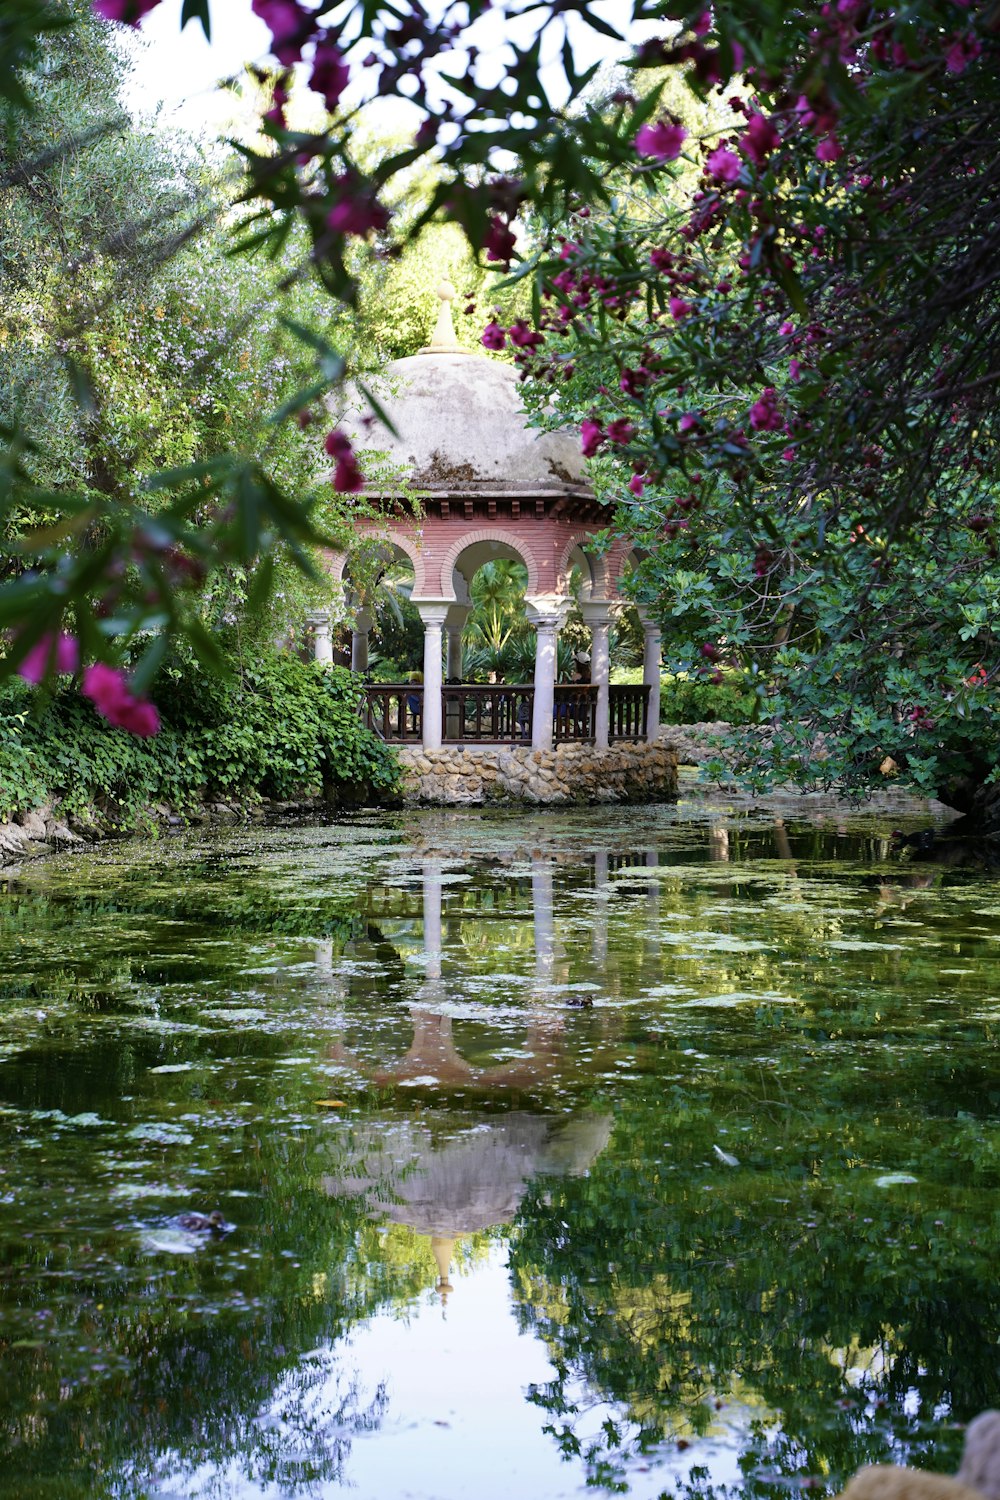 a gazebo in the middle of a pond surrounded by trees